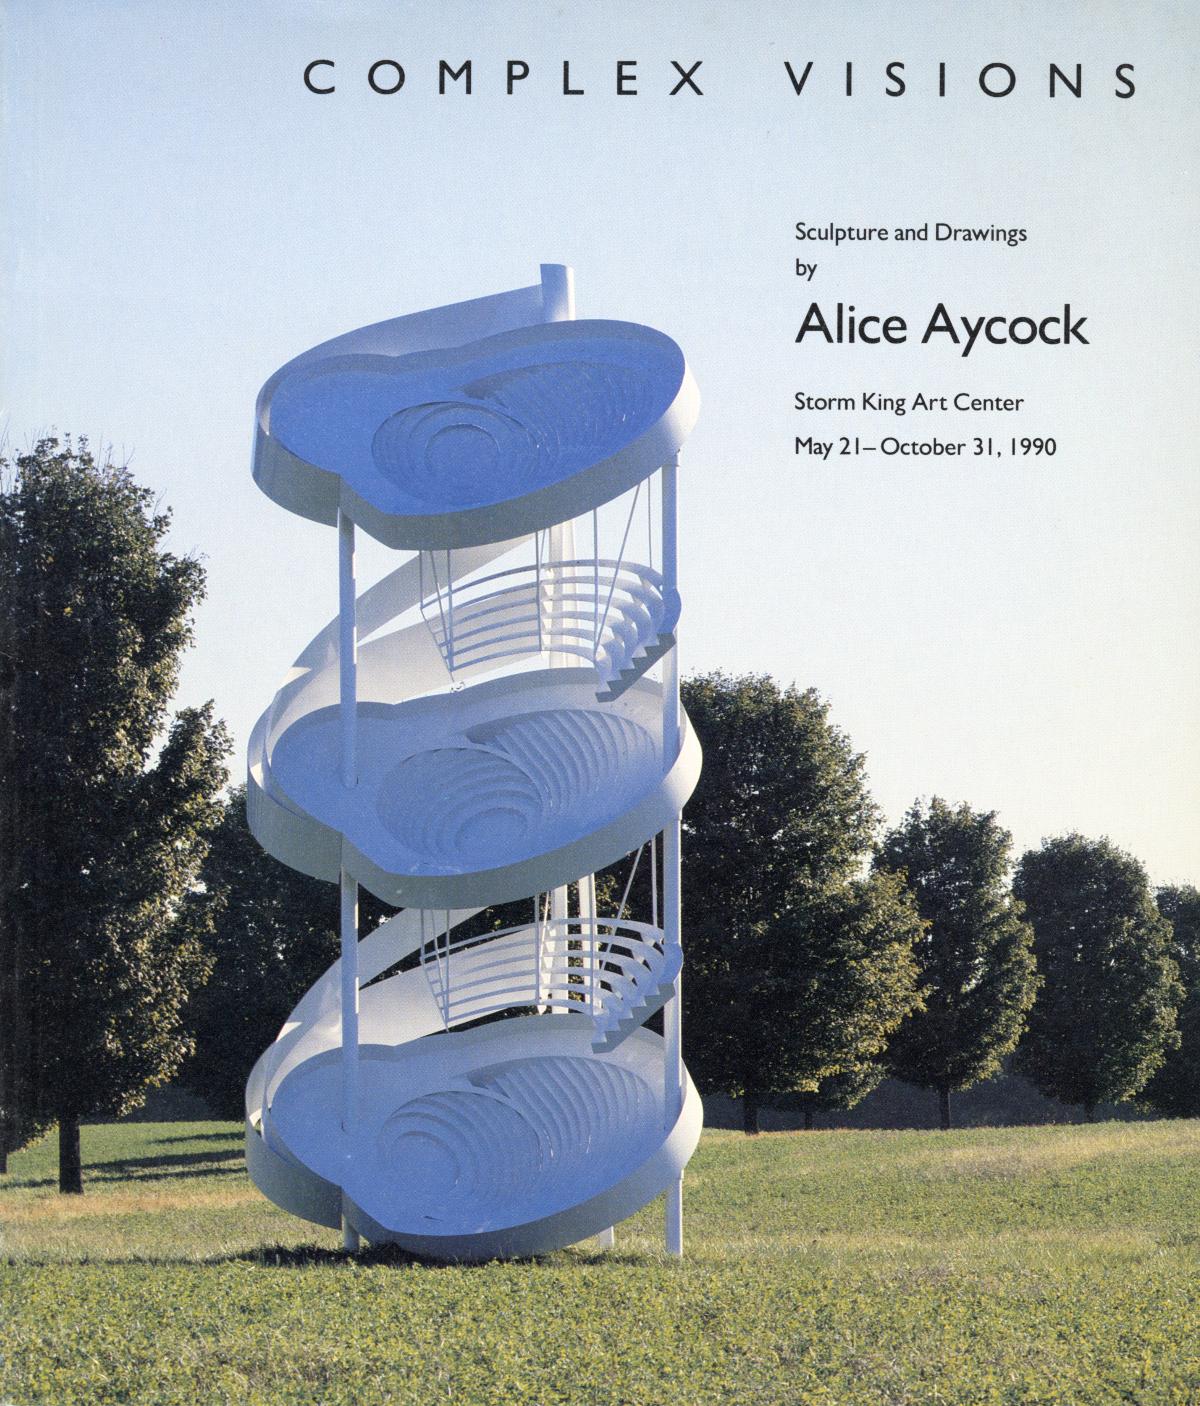 Complex Visions: Sculpture and Drawings by Alice Aycock, May 21 - October 31, 1990, exhibition catalogue cover